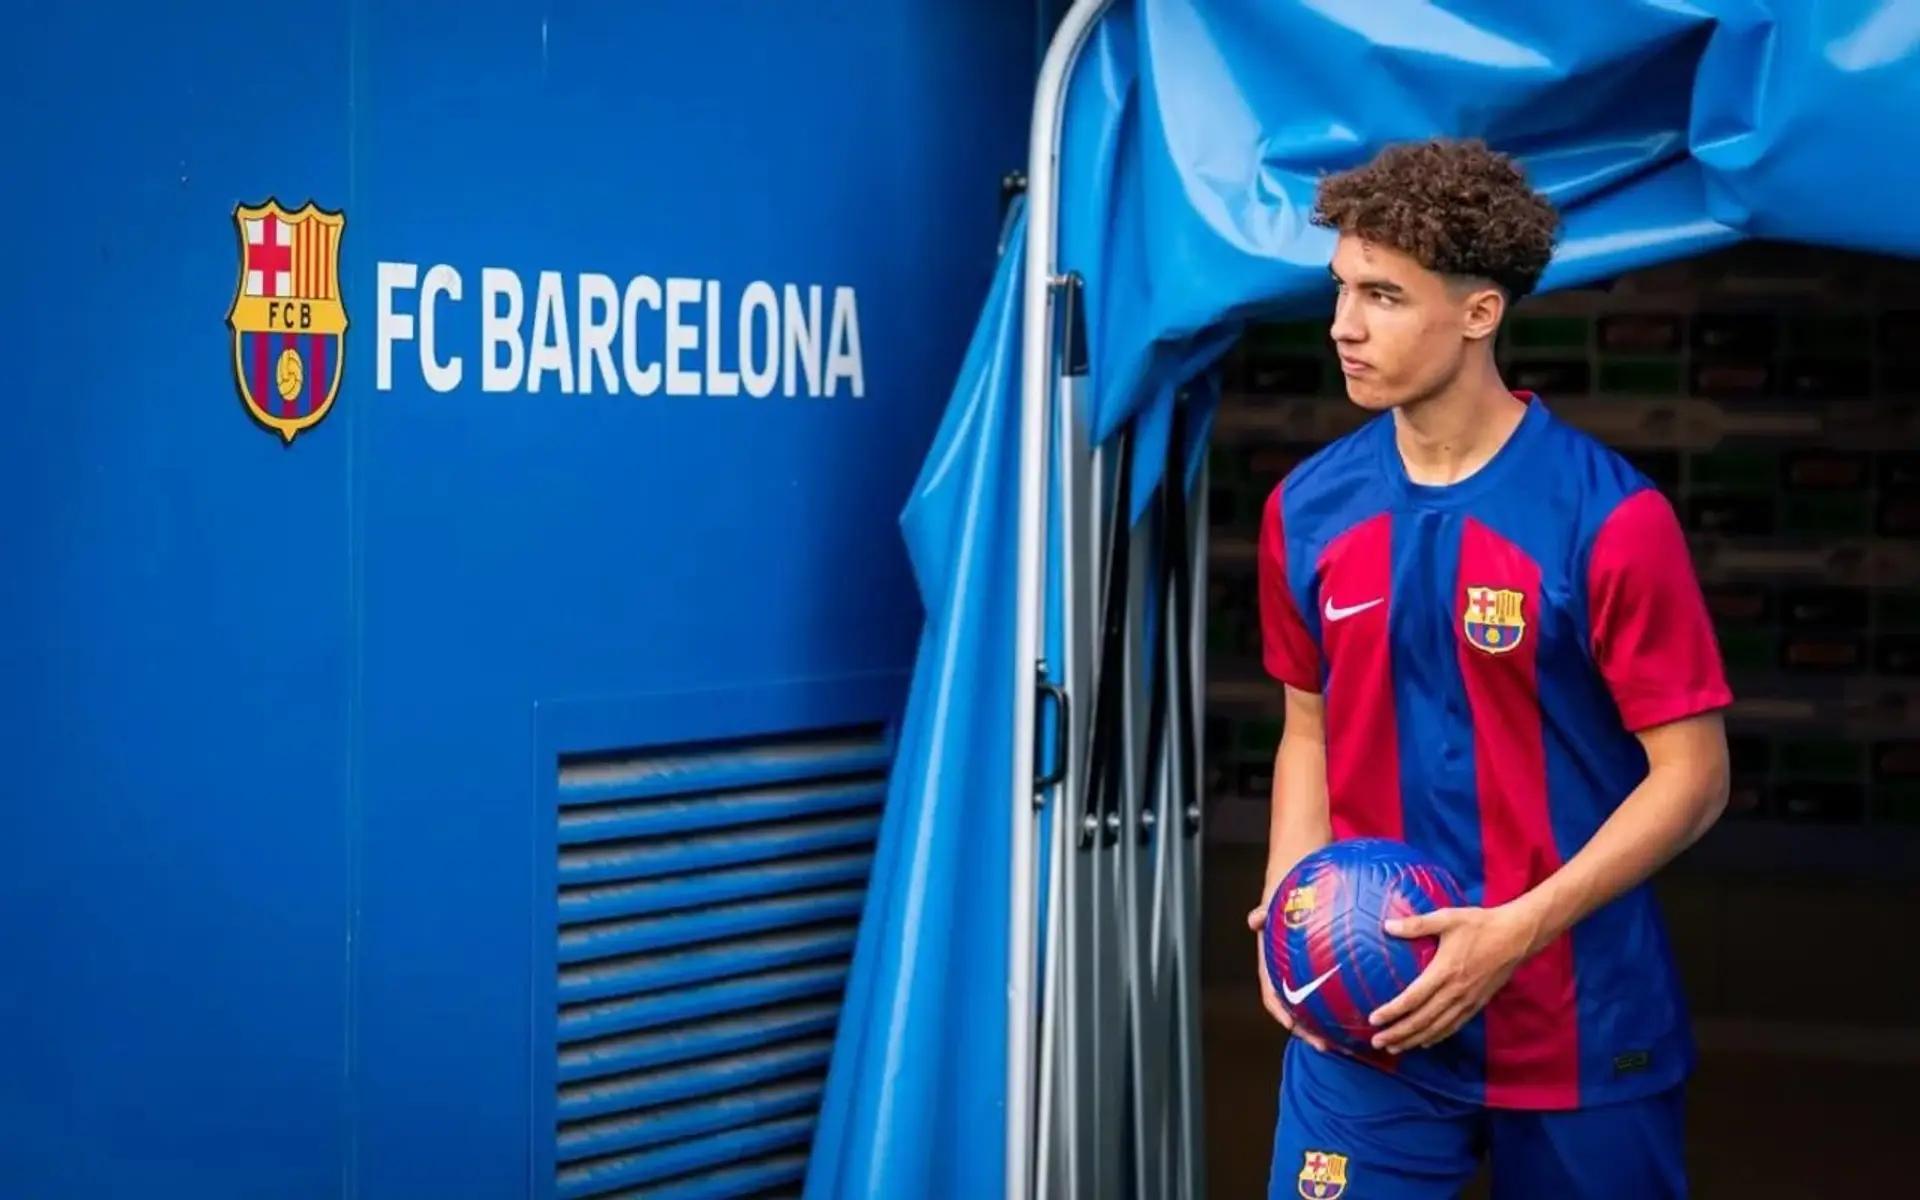 Barcelona sign €1,000,000,000 release at Football - set wonderkid, clause German